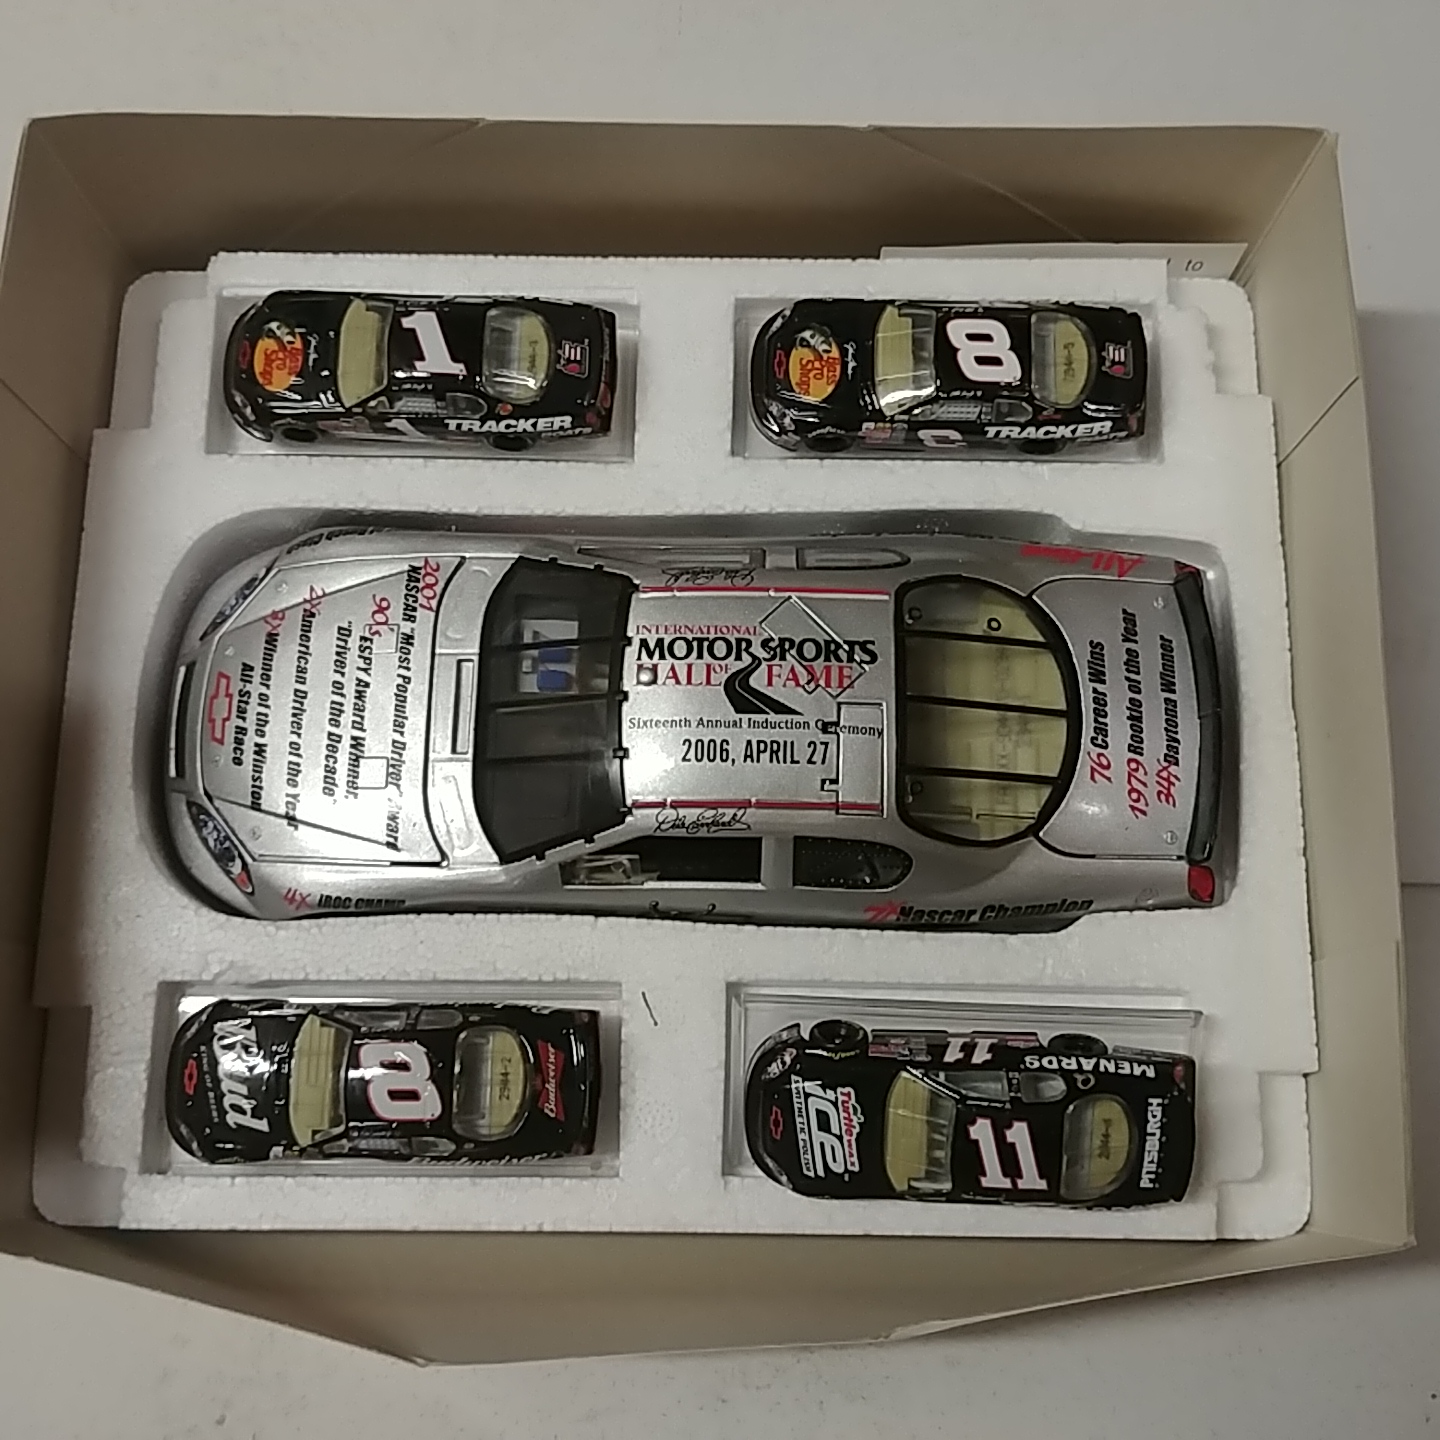 2006 Dale Earnhardt 1/24th Hall of Fame Car with 4 1/64th car set